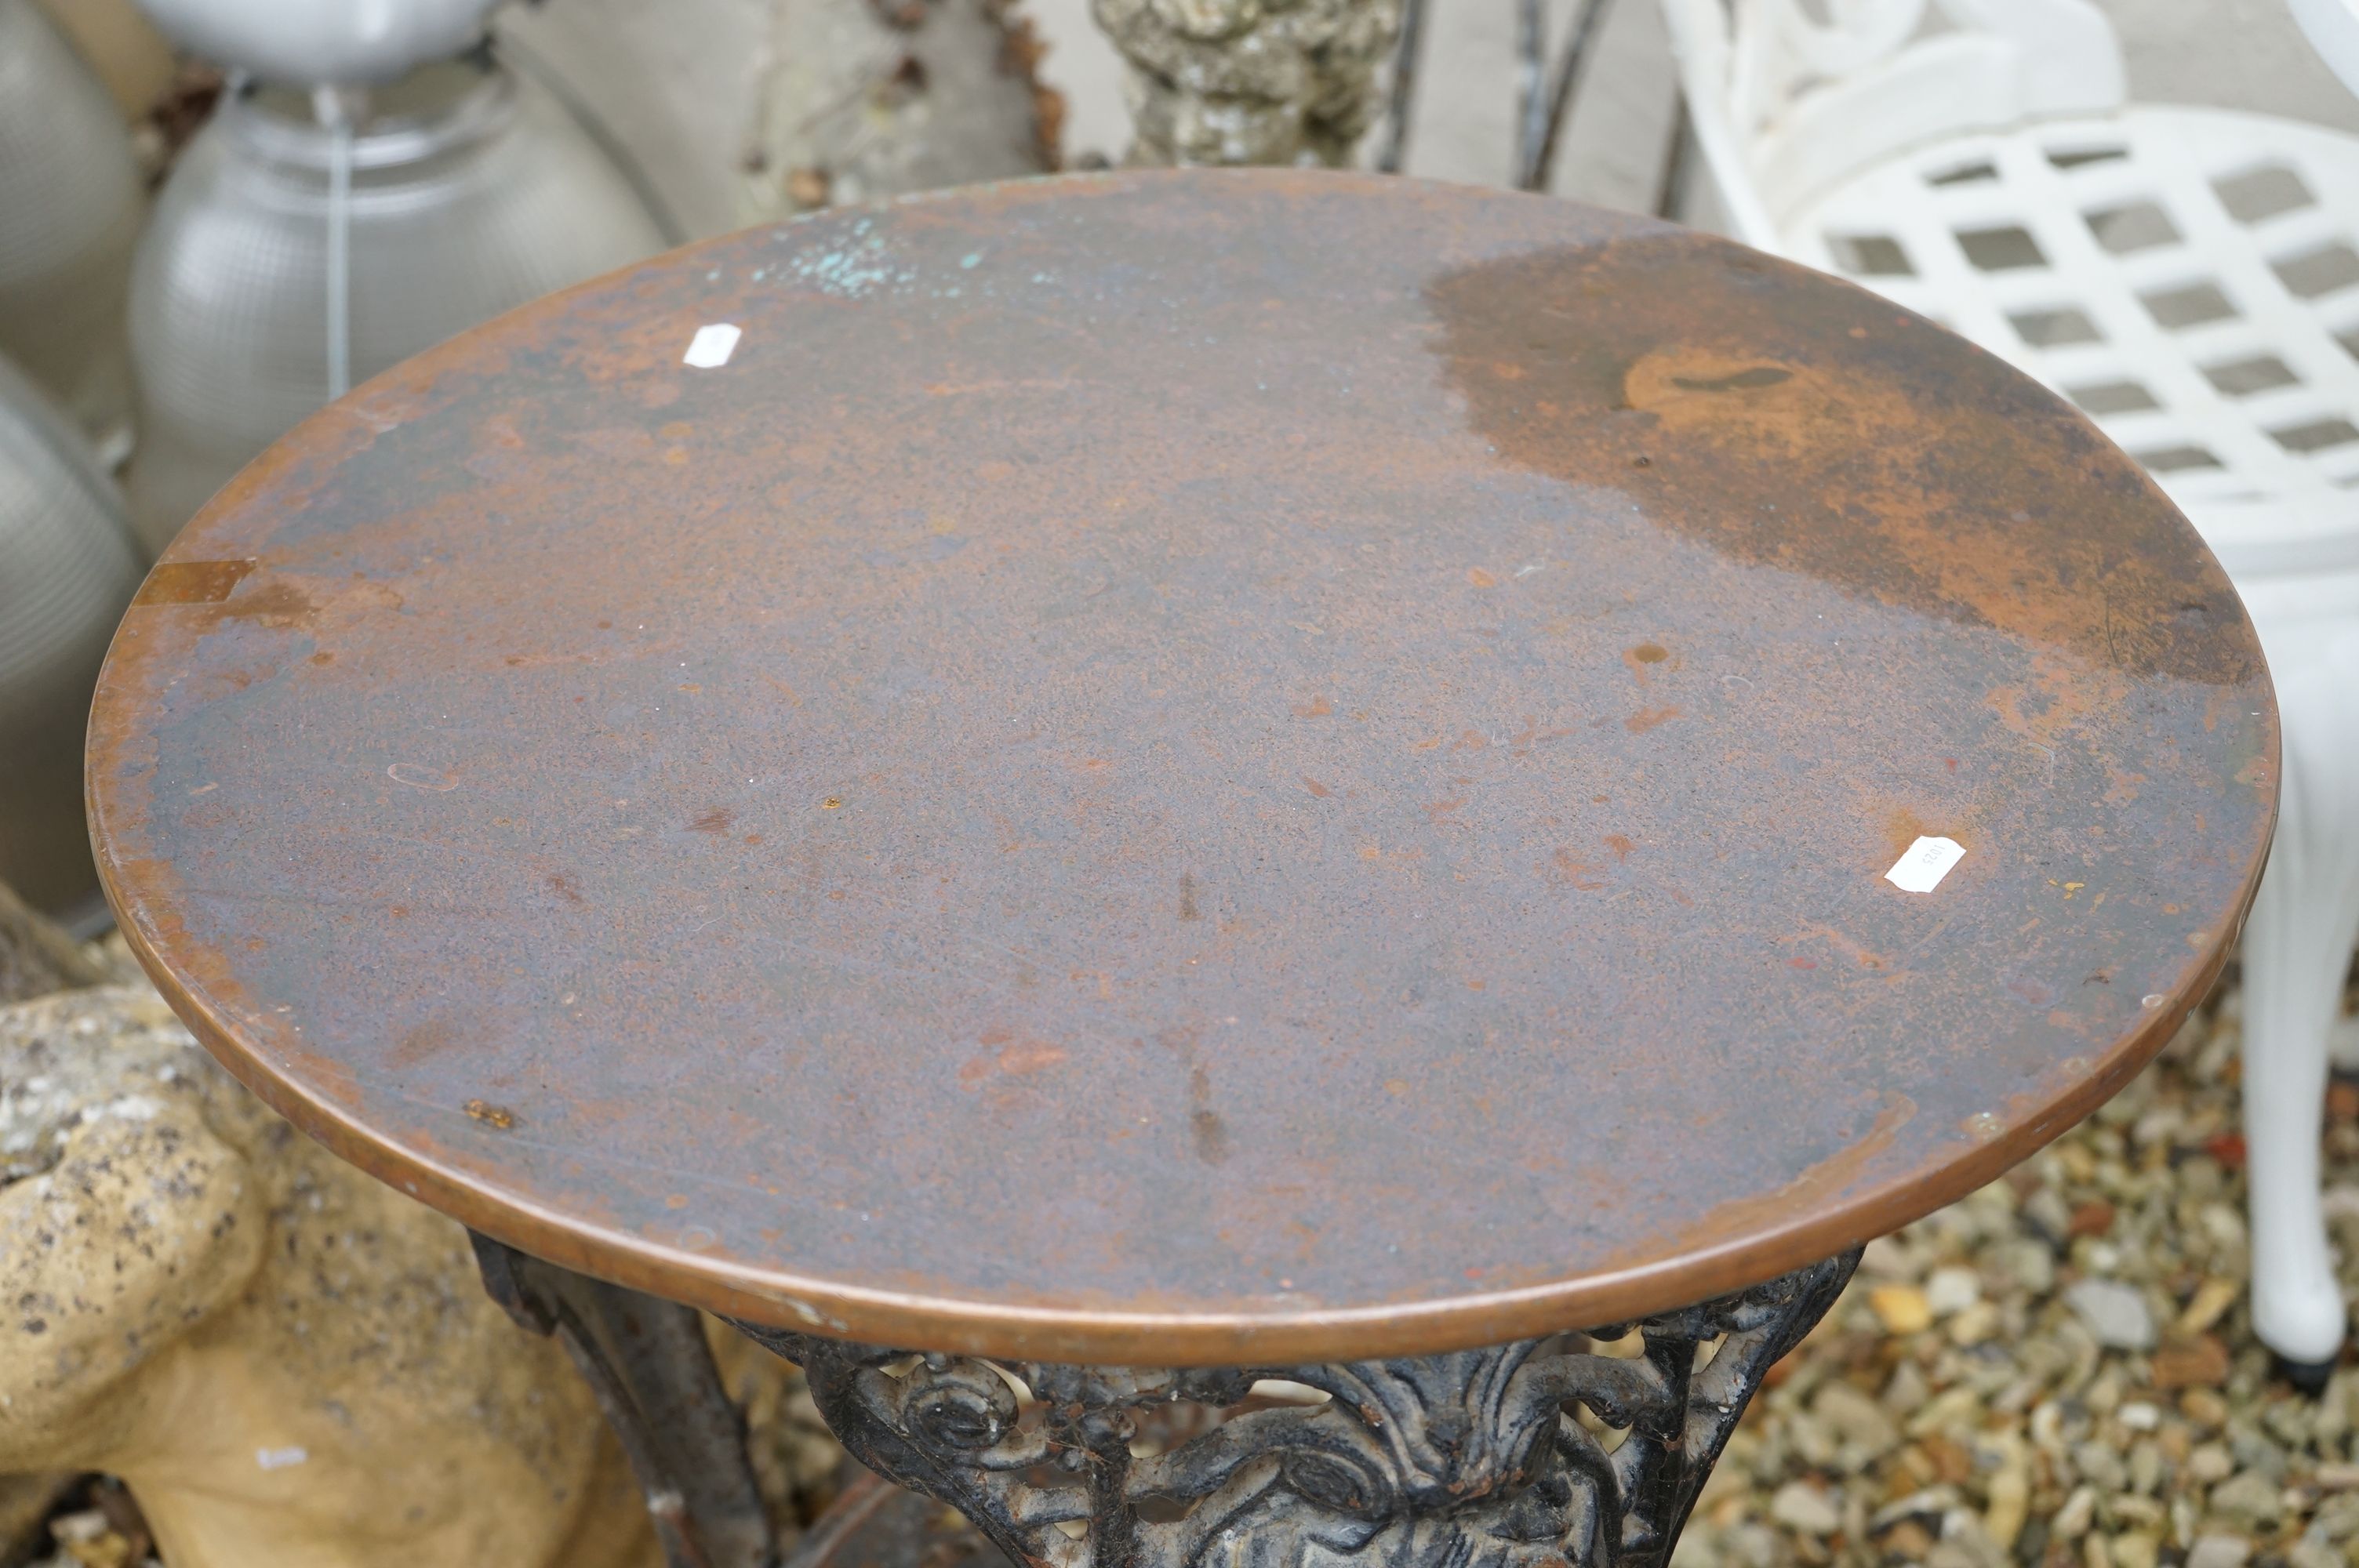 Pair of Cast Iron Circular Pub Tables with Copper Tops, with makers marks - Image 2 of 5